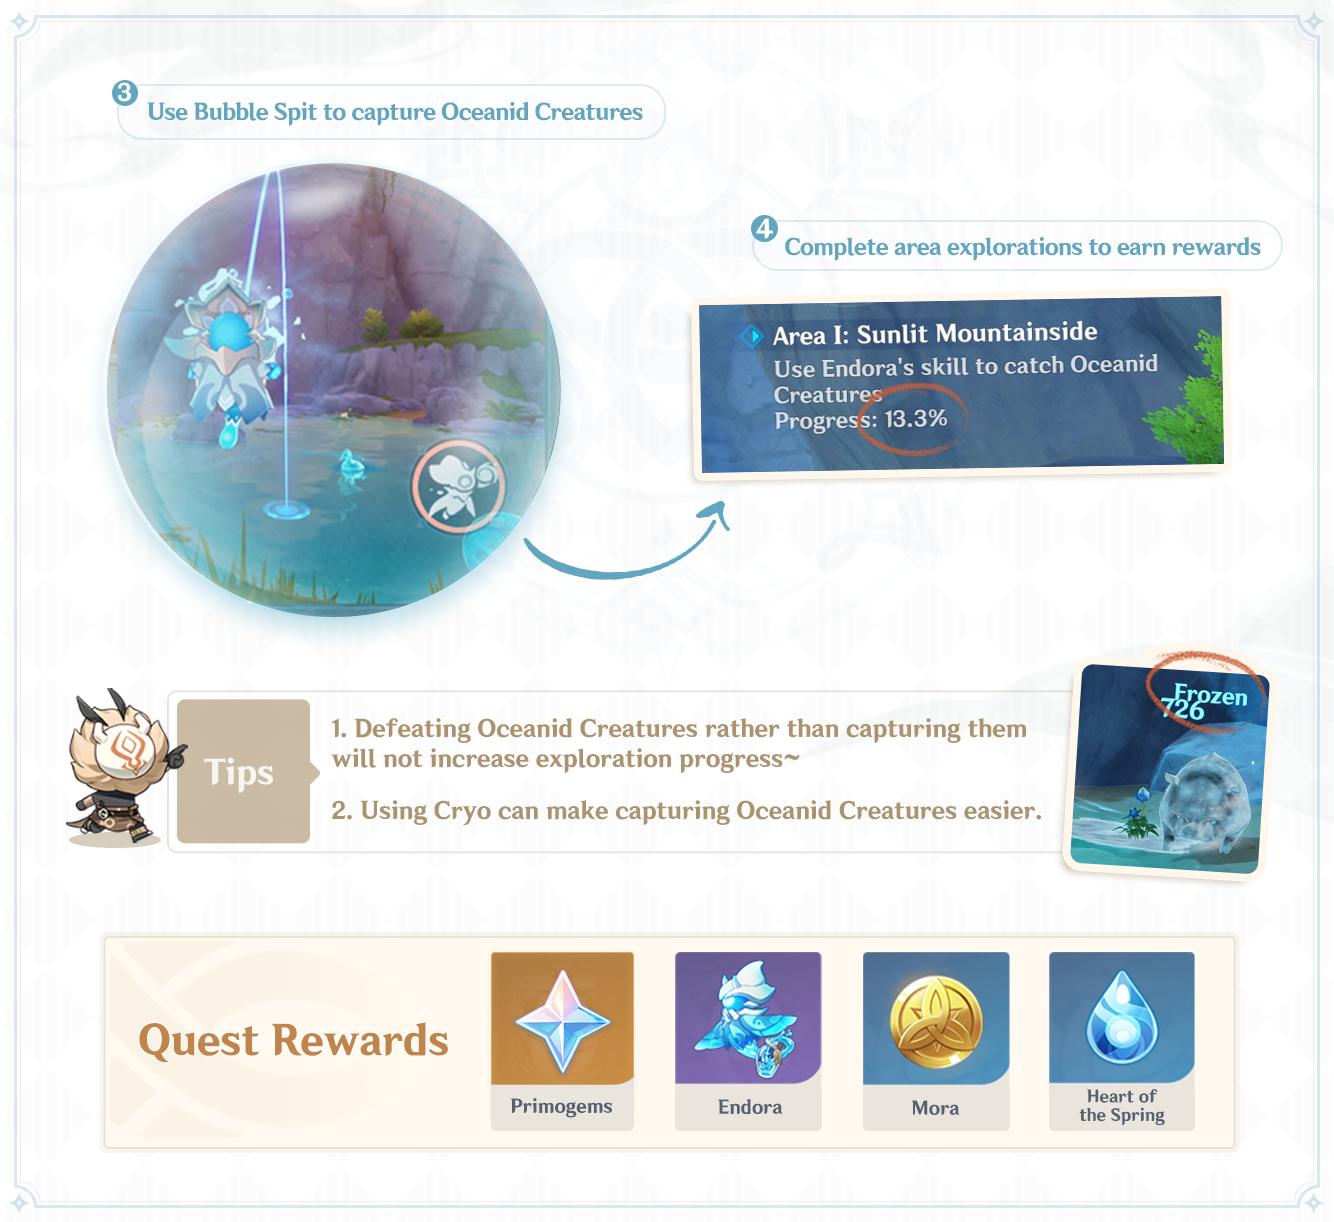 Genshin-Impact-Guide-To-Obtaining-The-Oceanid-Pet-Endora-2